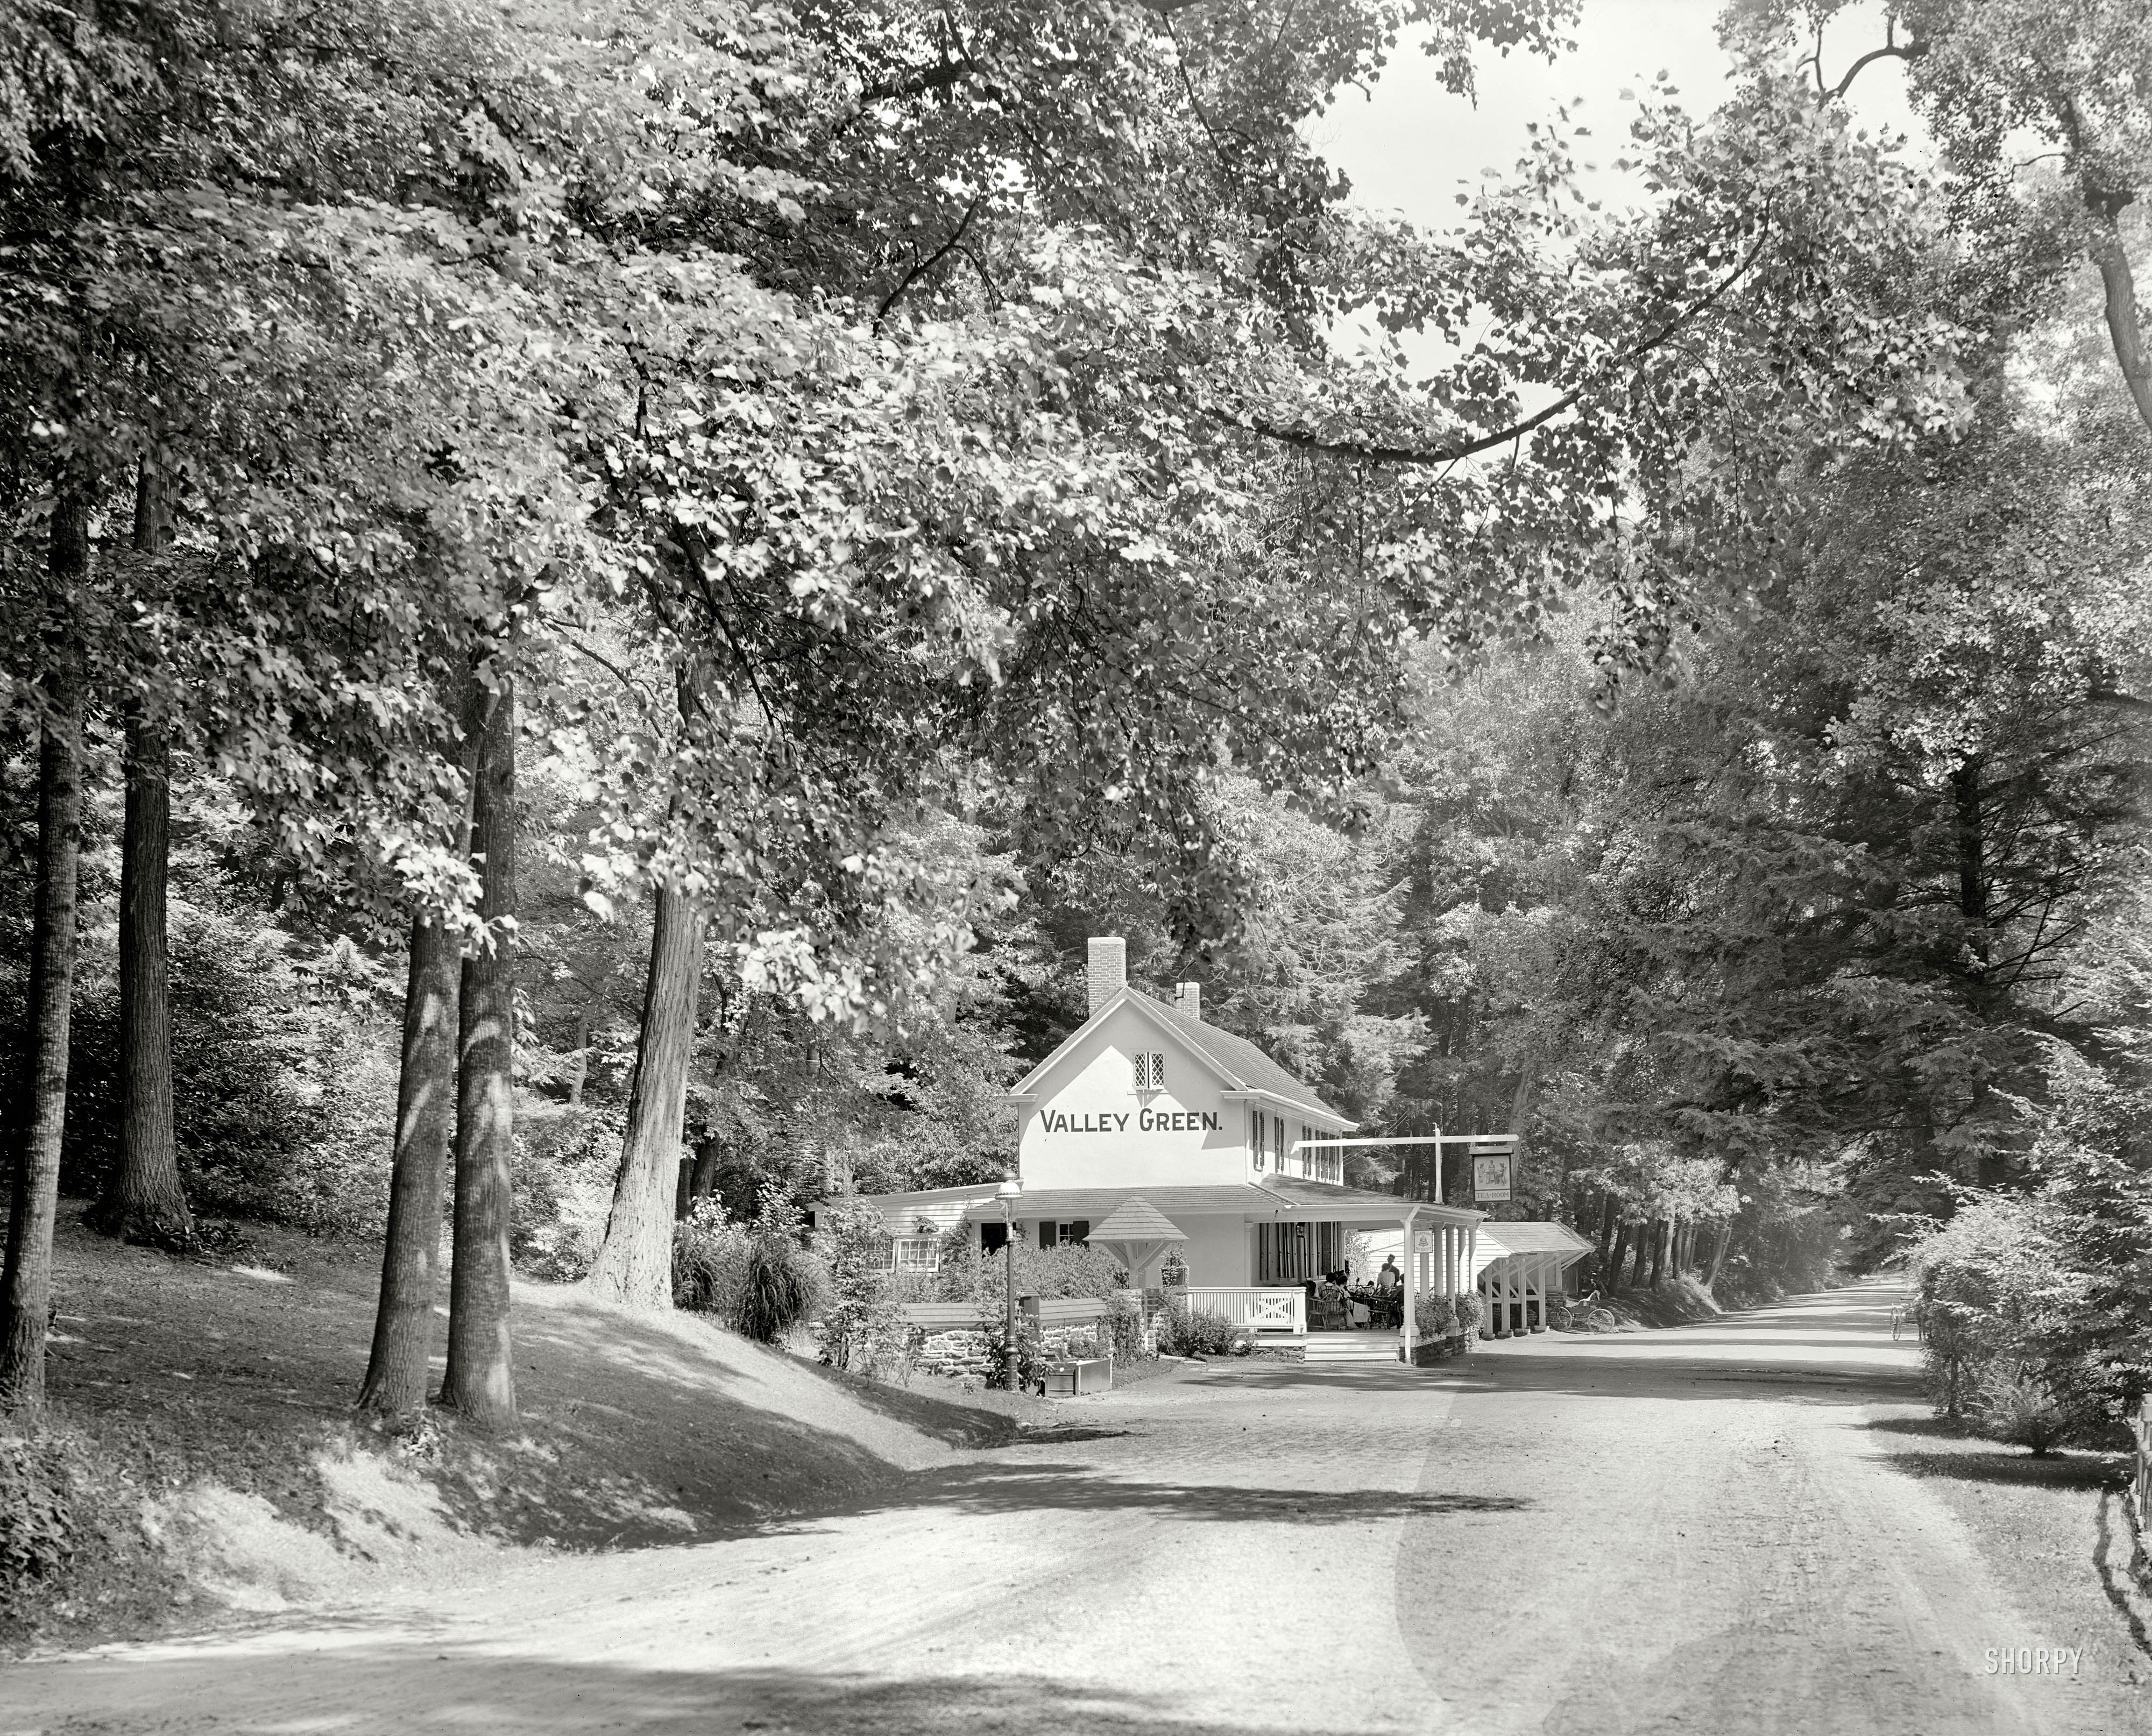 Philadelphia circa 1909. "Valley Green, Fairmount Park." Back in the day, less green than gray. 8x10 glass negative, Detroit Publishing Co. View full size.